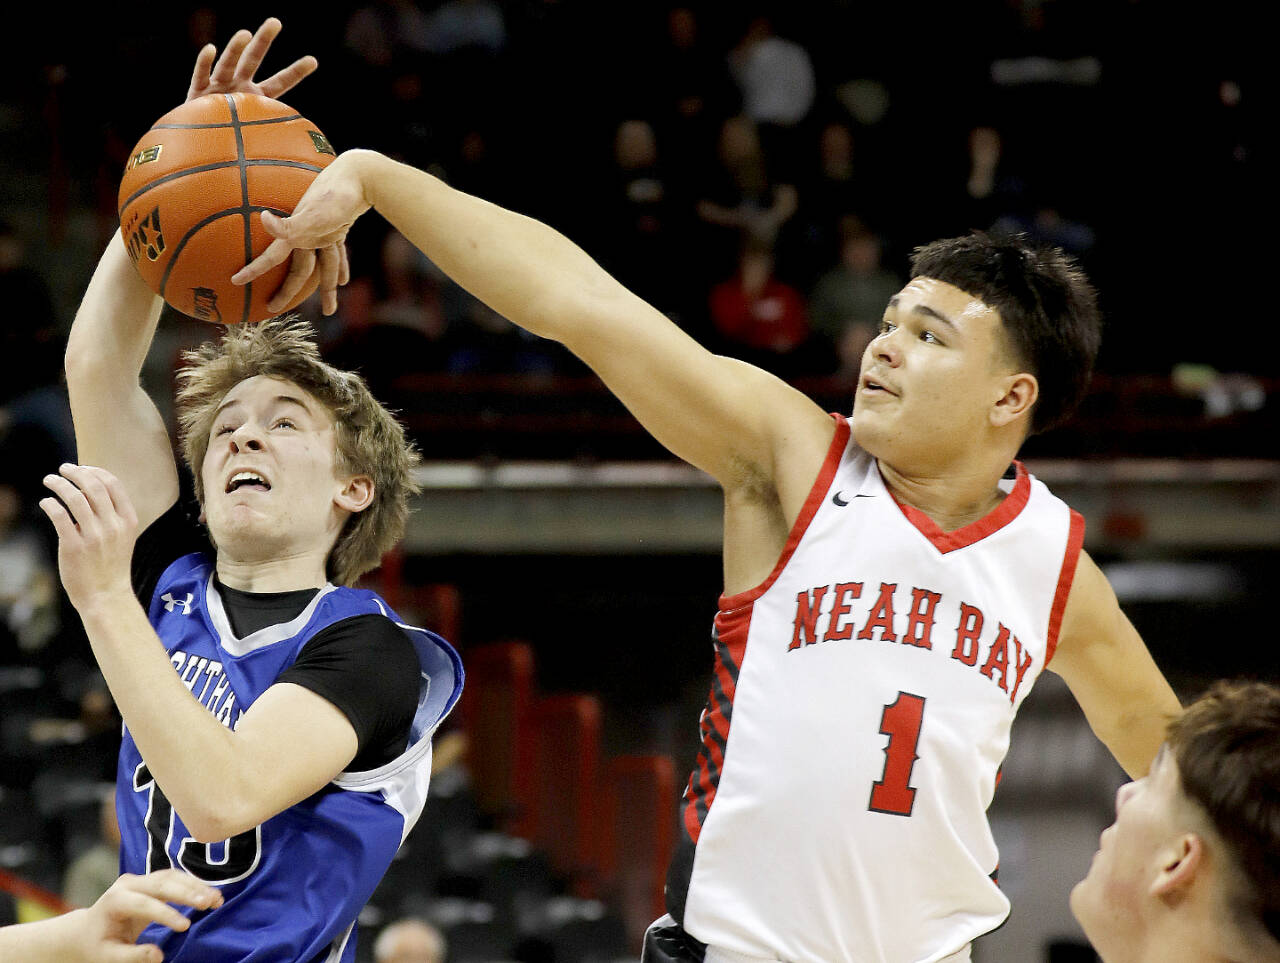 Neah Bay’s Jodell Wimberly blocks a shot at the state 1B tournament against Oakesdale last week at the Spokane Arena. The Neah Bay boys finished fifth in the state. (Roger Harnack/Cheney Free Press)